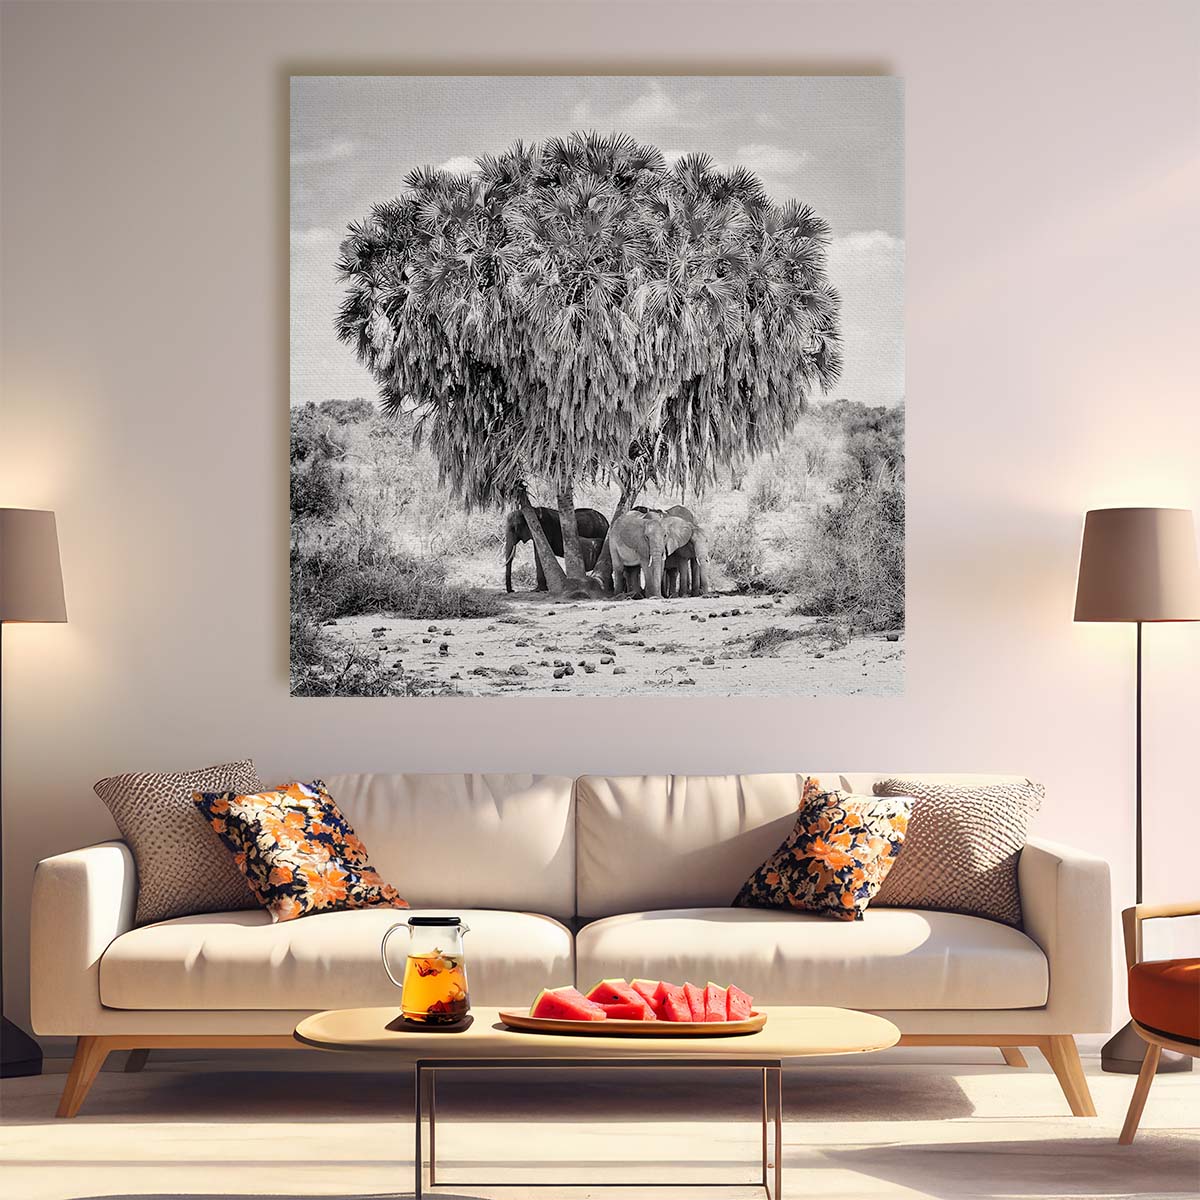 Monochrome Wildlife Photography Elephant Group Meeting in Tsavo, Kenya Wall Art by Luxuriance Designs. Made in USA.